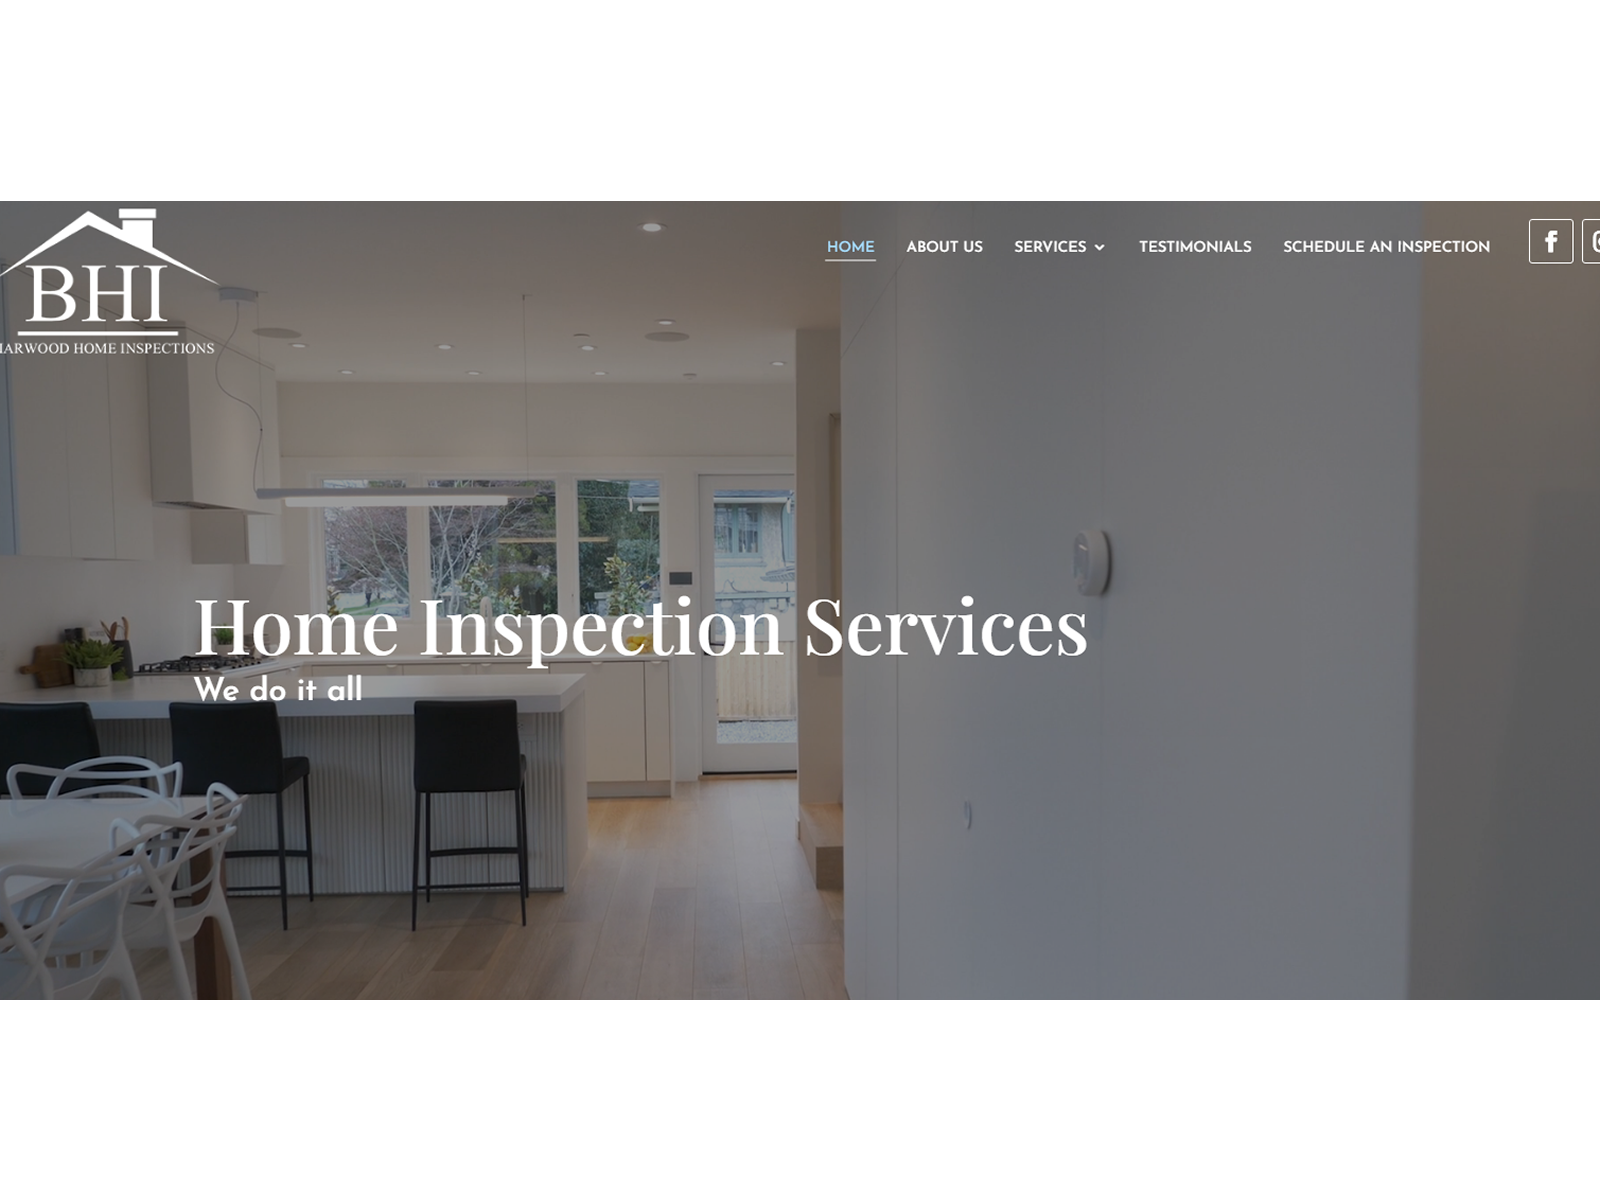 briarwood-home-inspections-awwwards-nominee